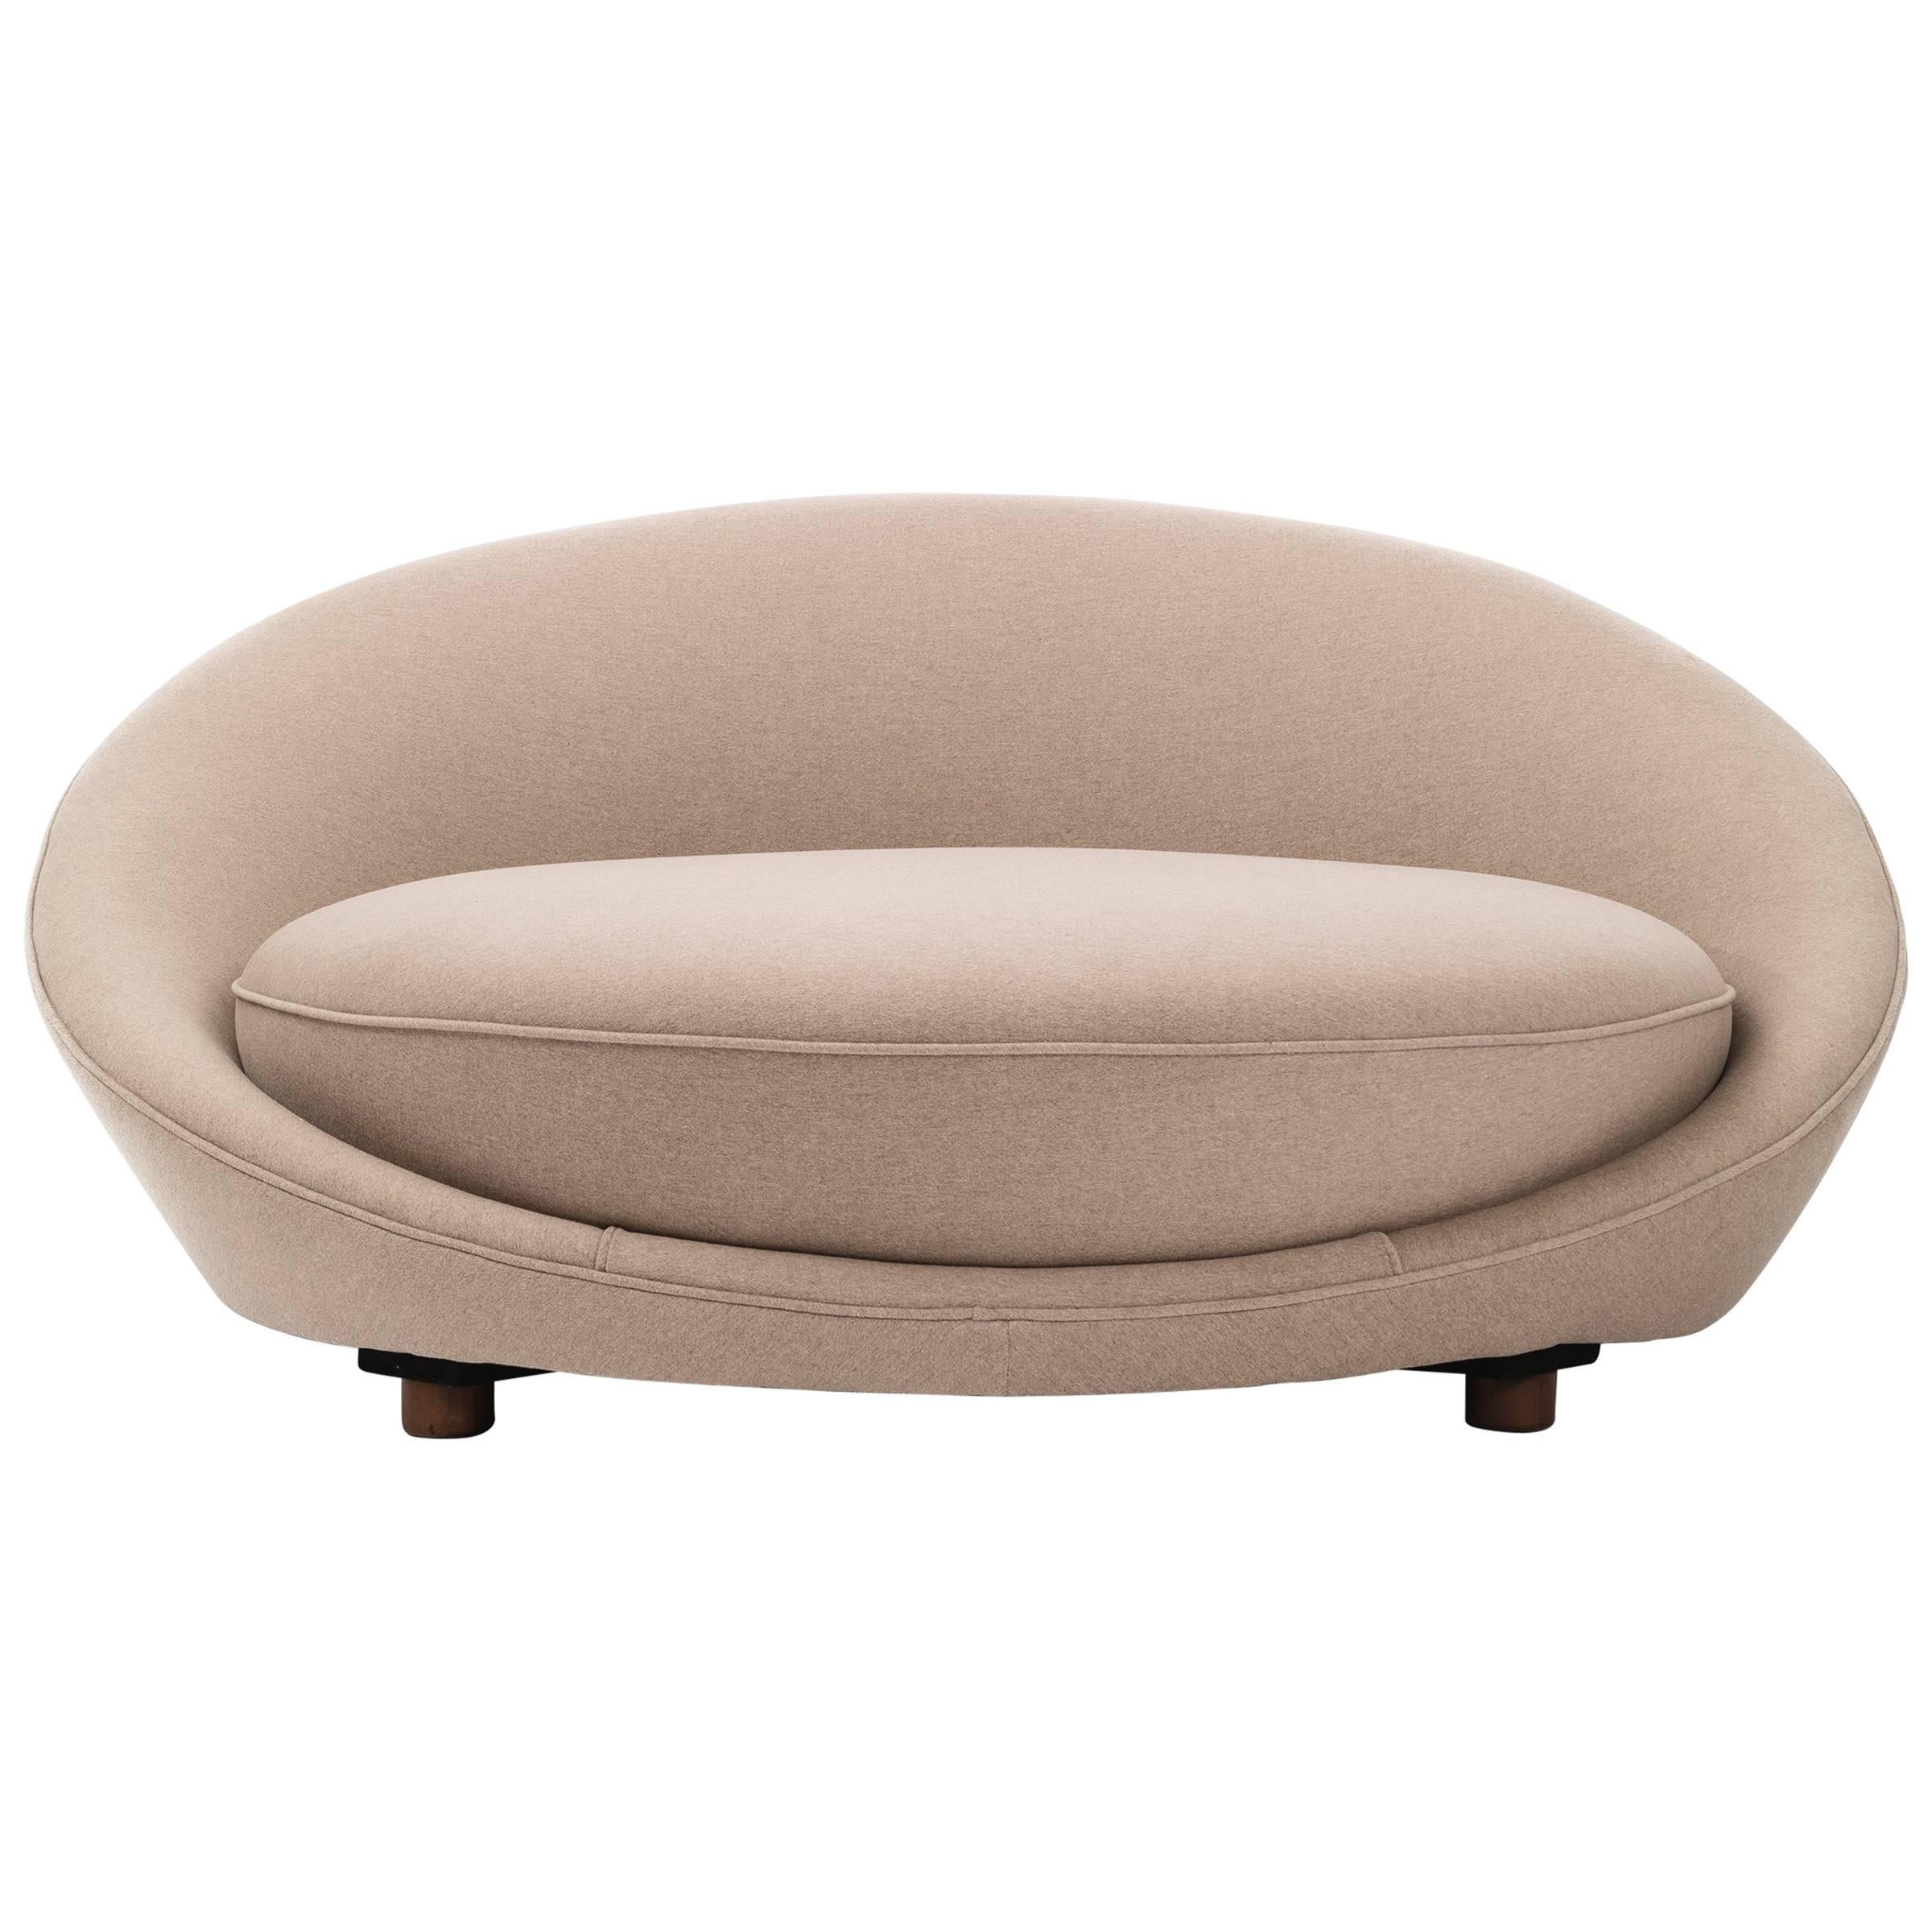 Oversized chaise longue for 1-2 people. Newly upholstered with foam and fabric. Curved barrel back with spring cushion on four wooden legs.